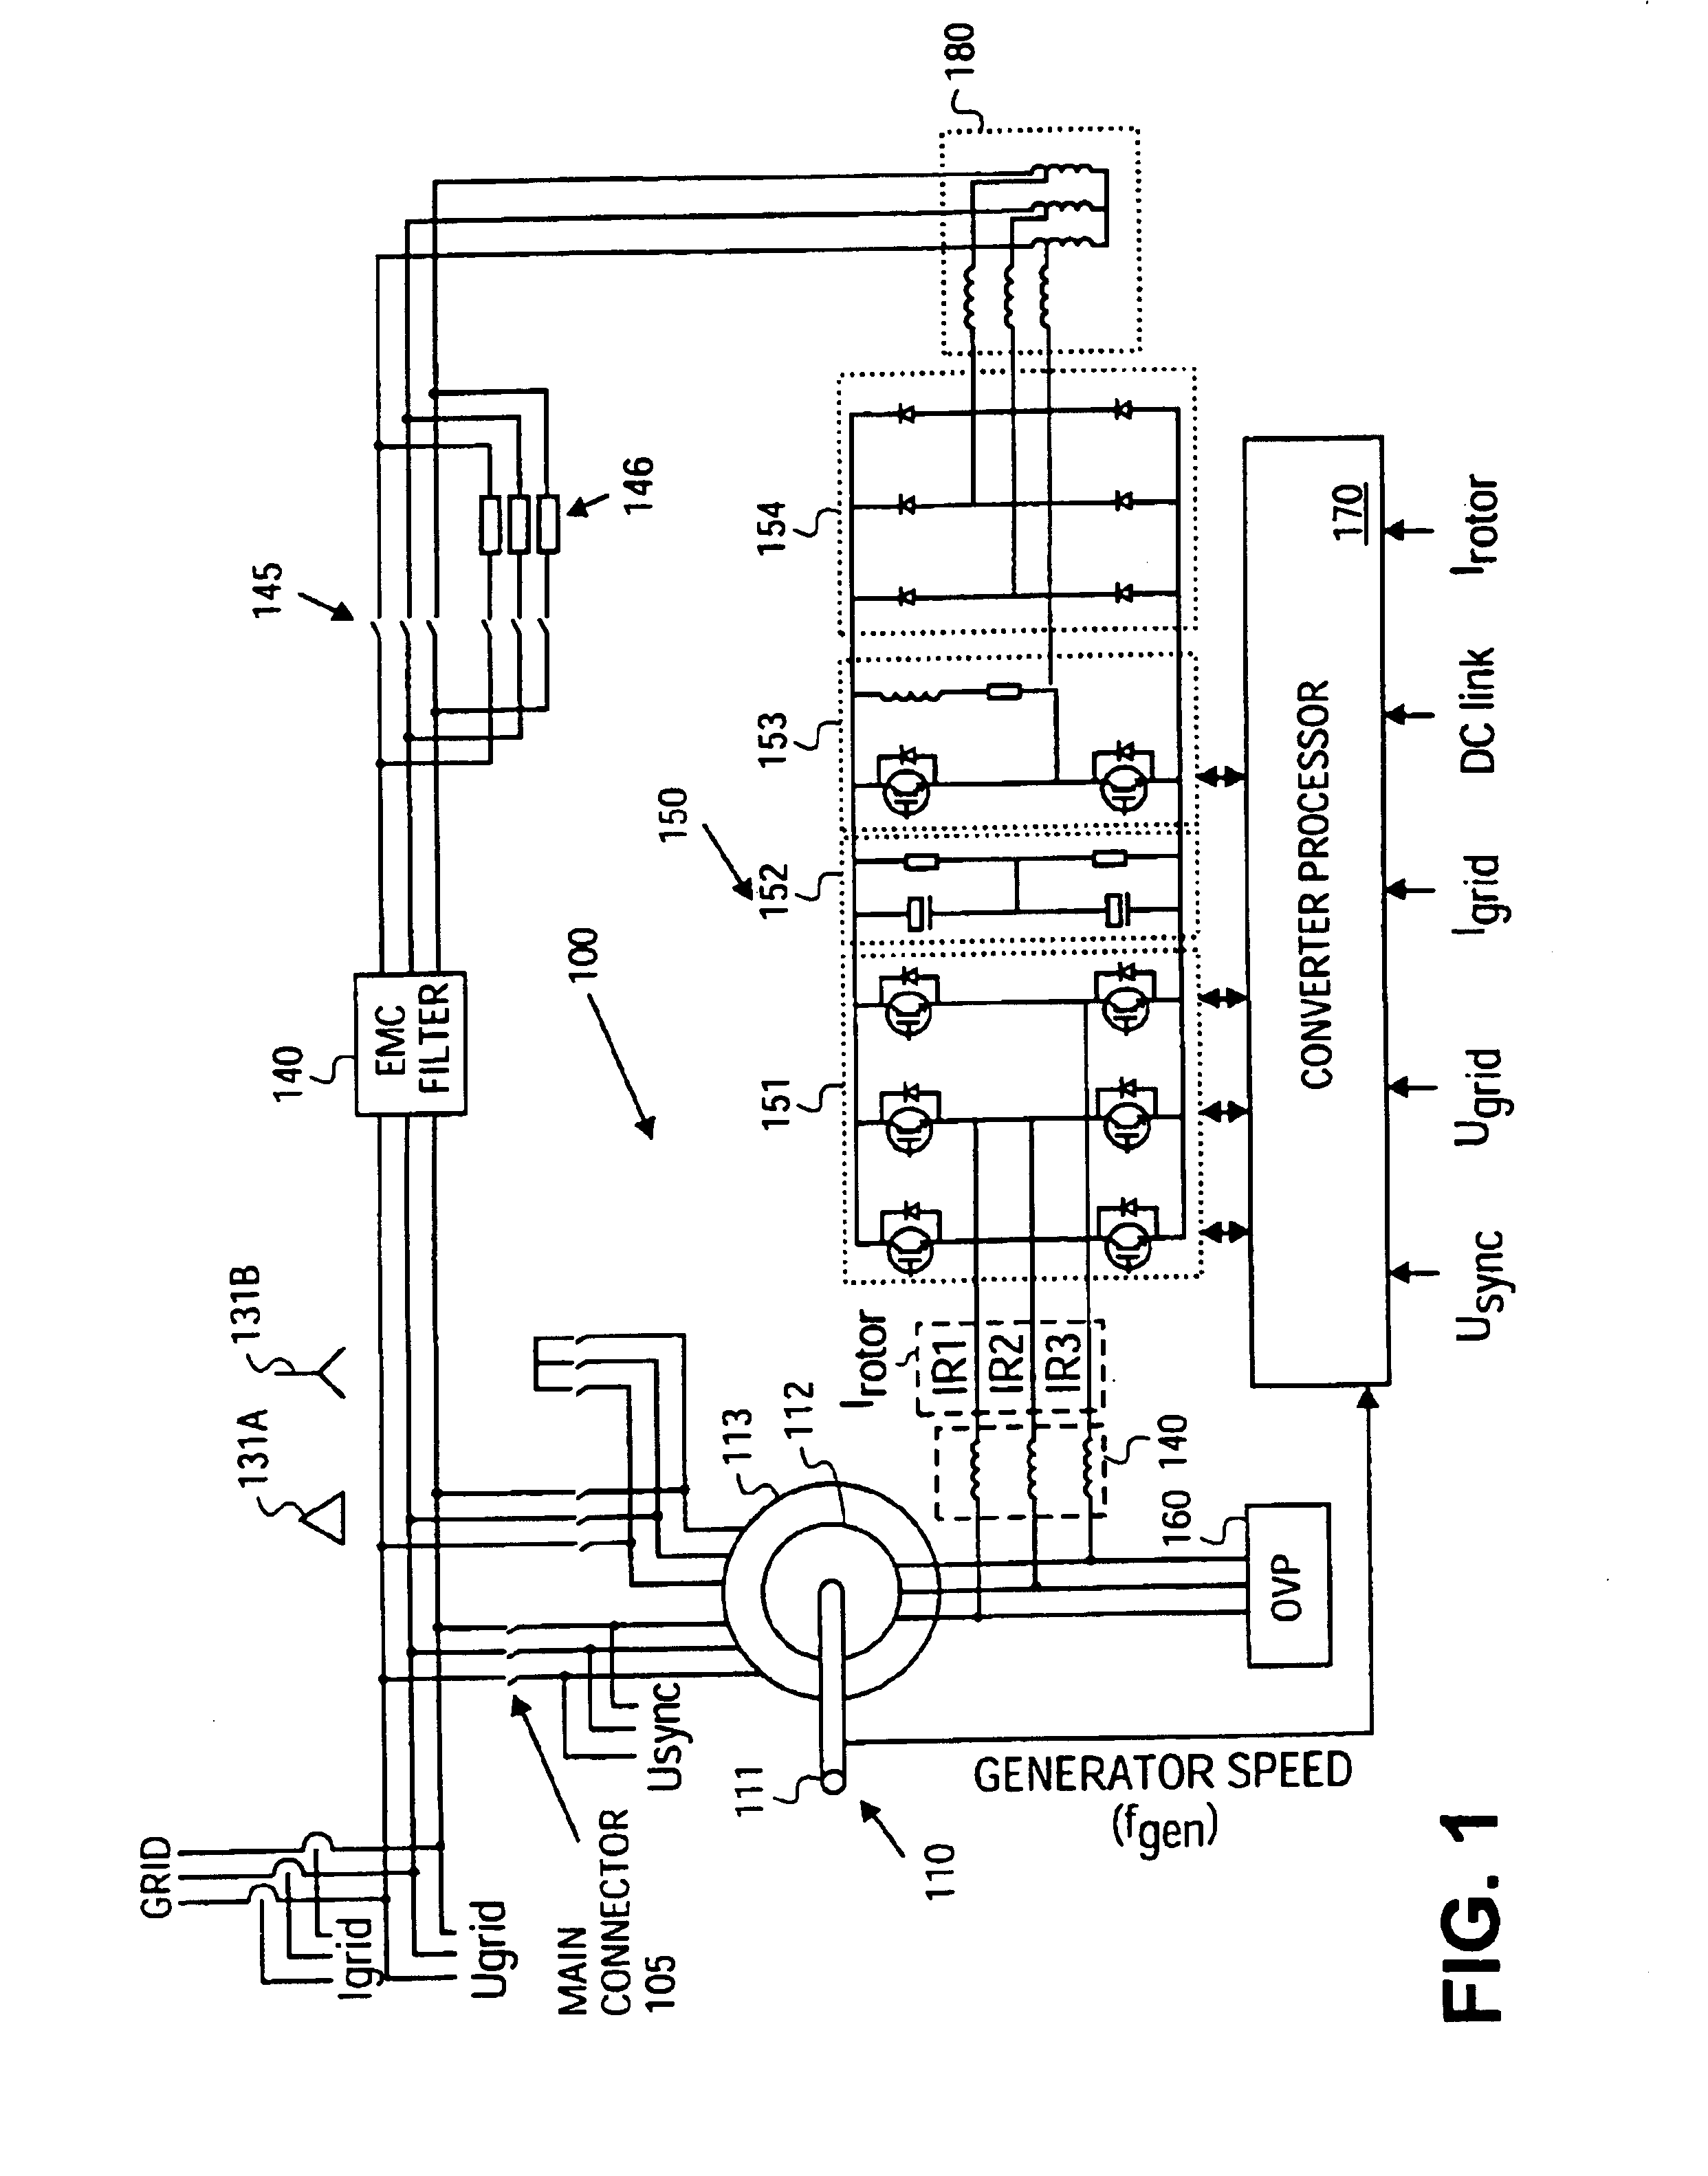 Variable speed wind turbine having a passive grid side rectifier with scalar power control and dependent pitch control